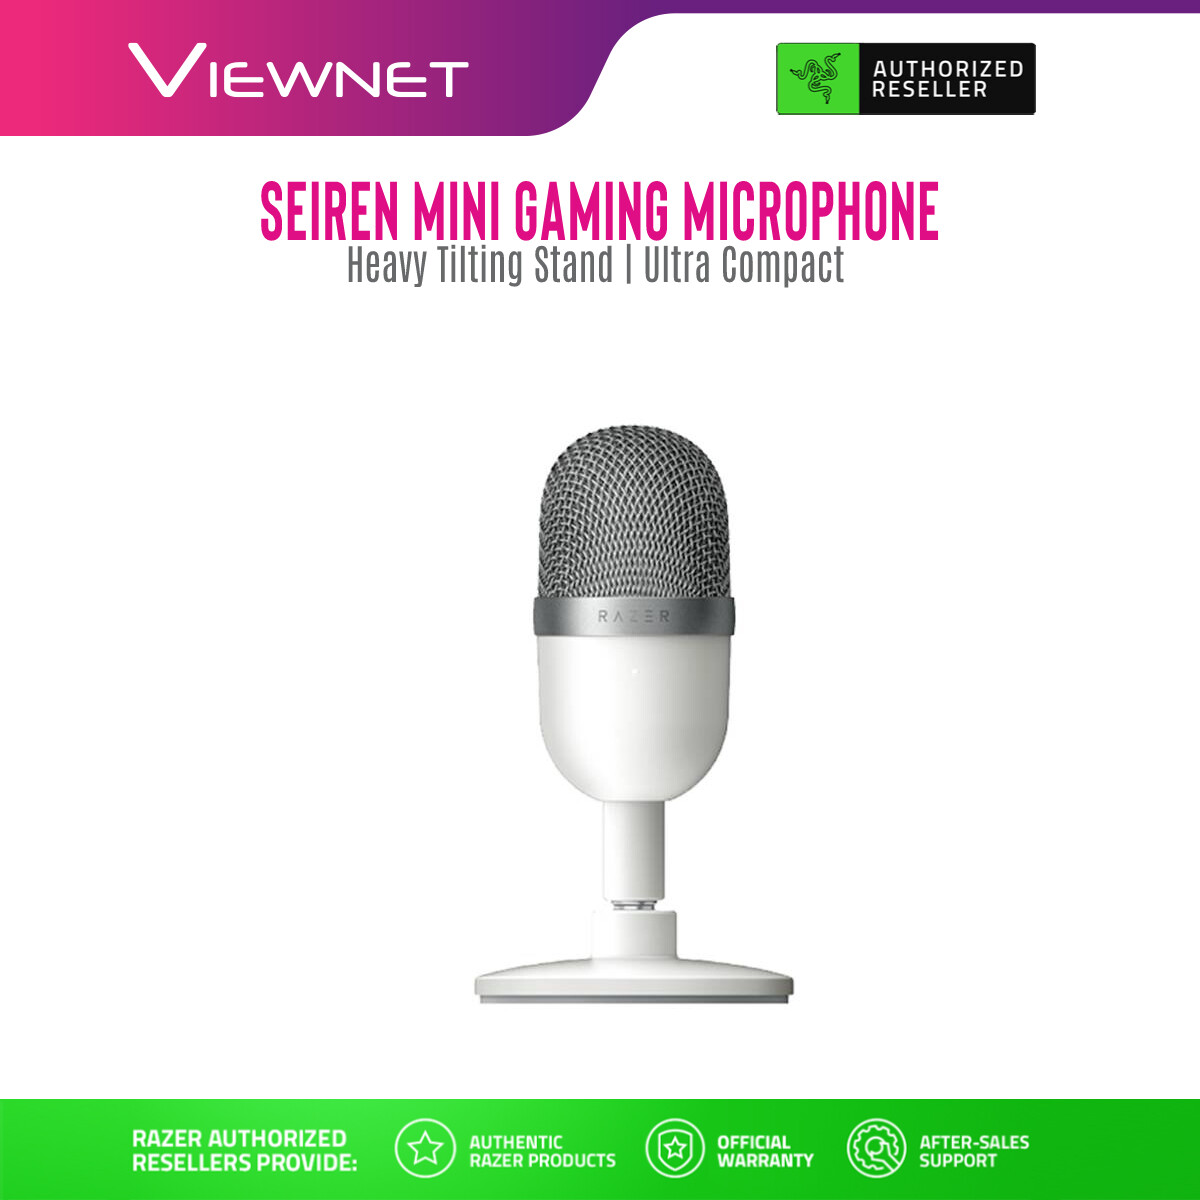 Razer Seiren Mini Gaming Mic with Ultra-Precise Supercardioid Pickup Pattern, Heavy-Duty Tilting Stand, USB Plug And Play